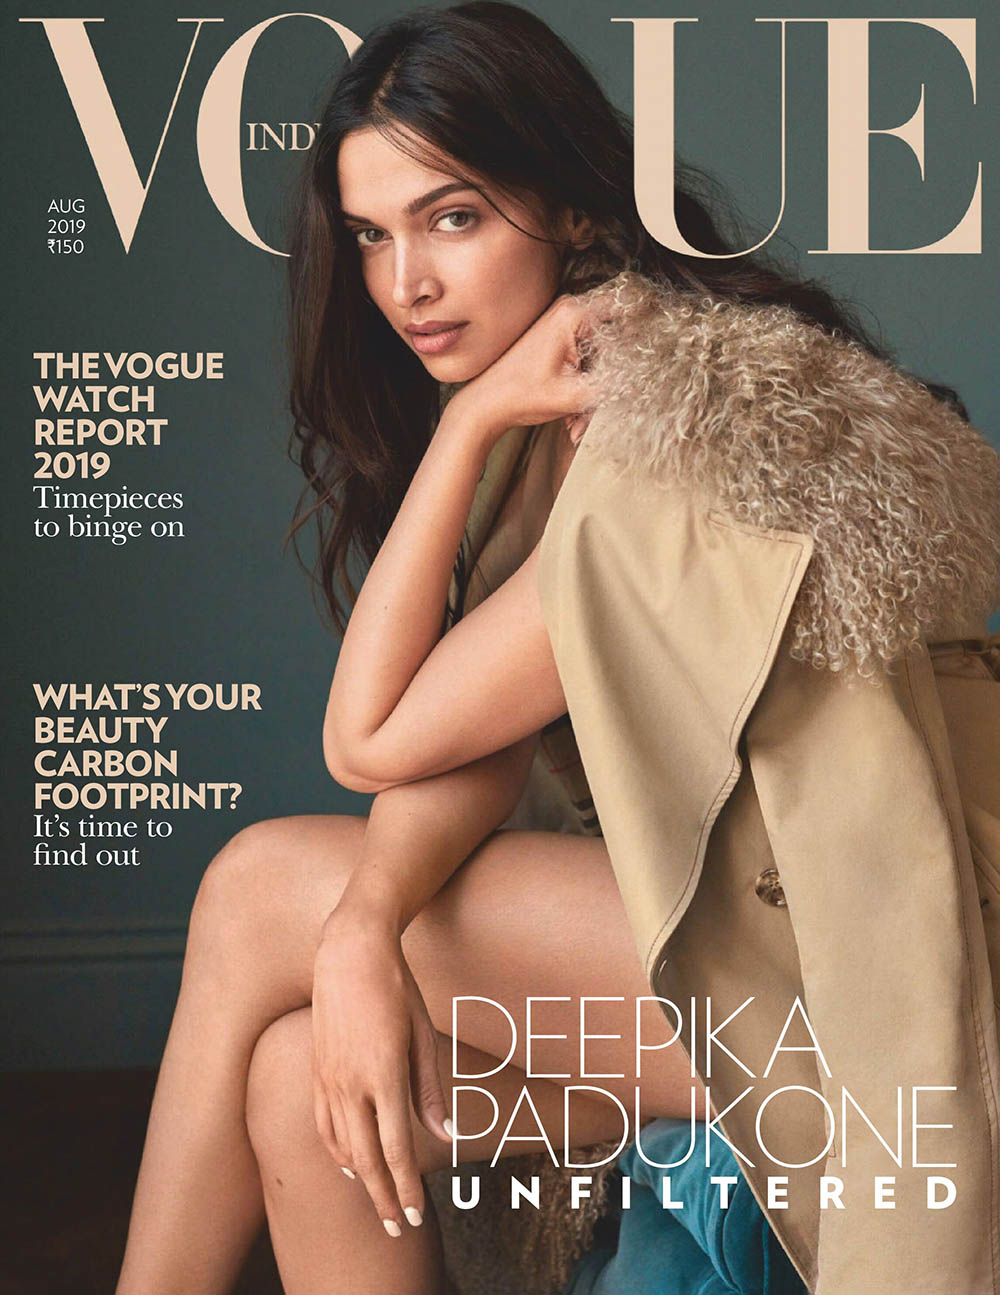 Deepika Padukone covers Vogue India August 2019 by Greg Swales